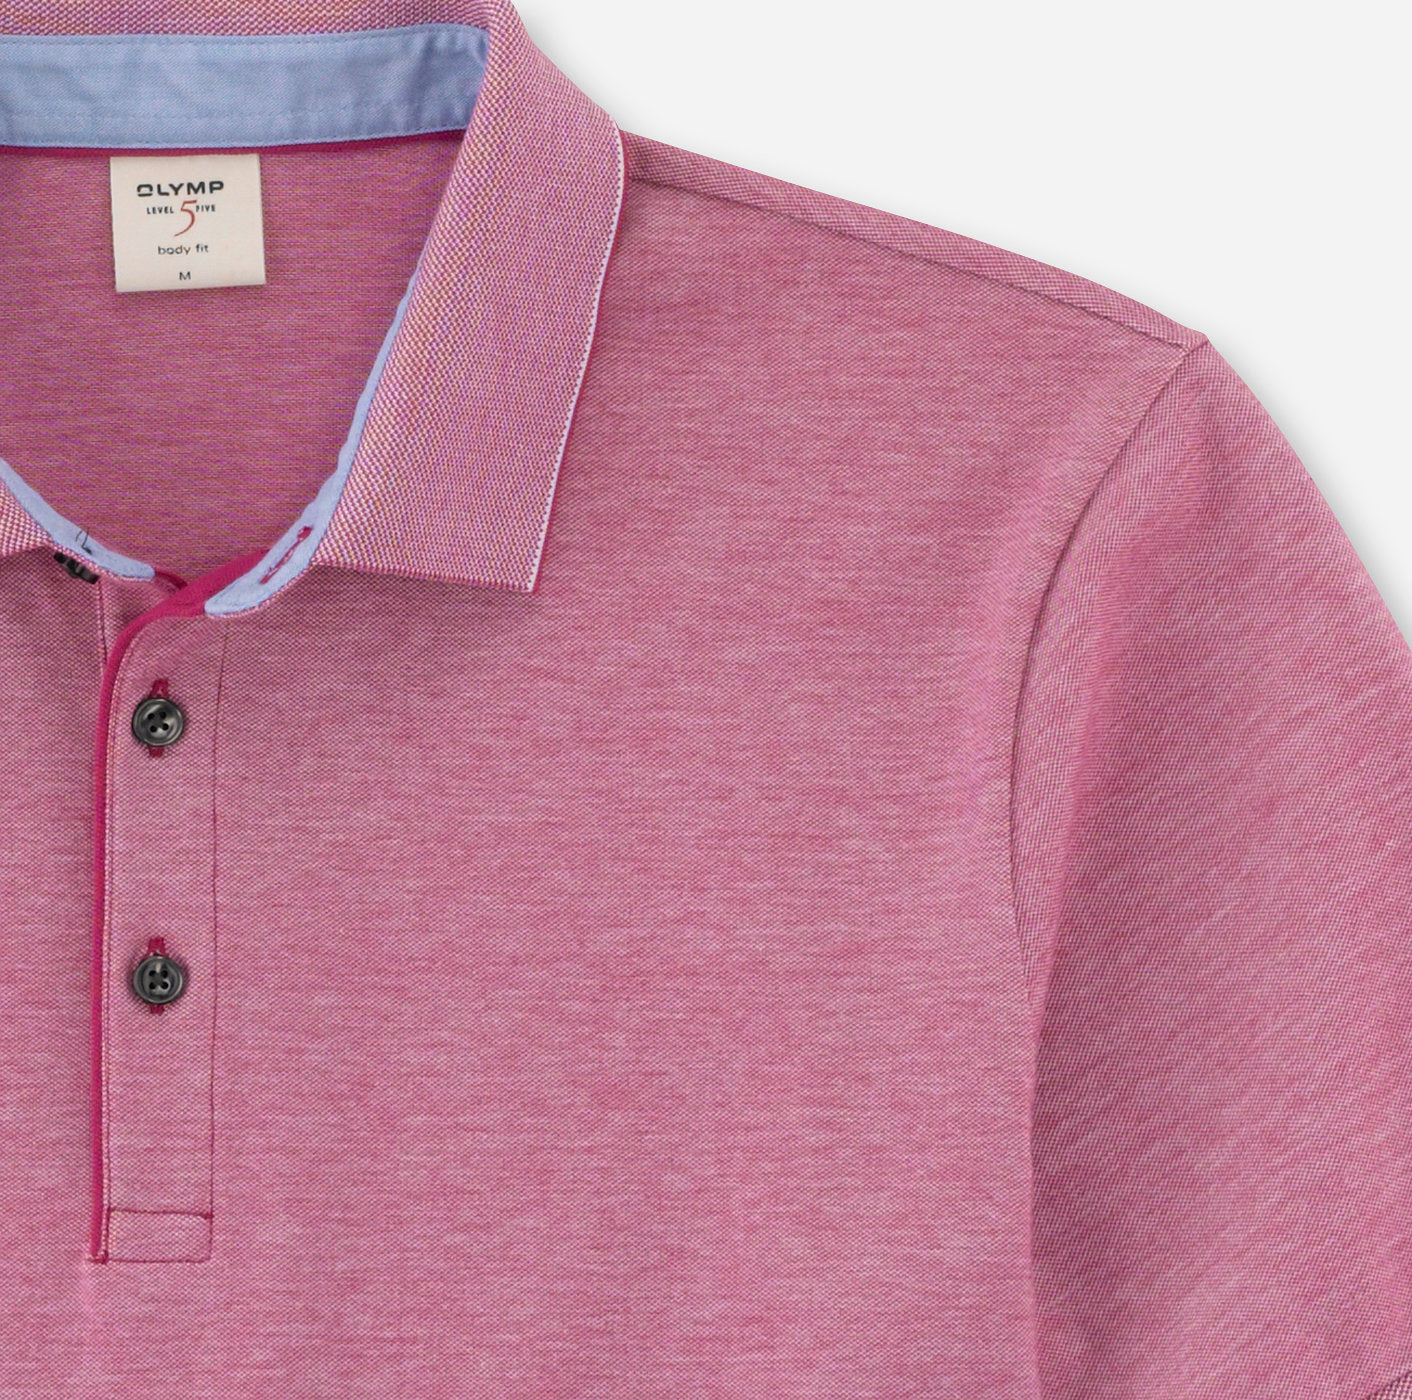 Level 5 polo in Mauve by OLYMP